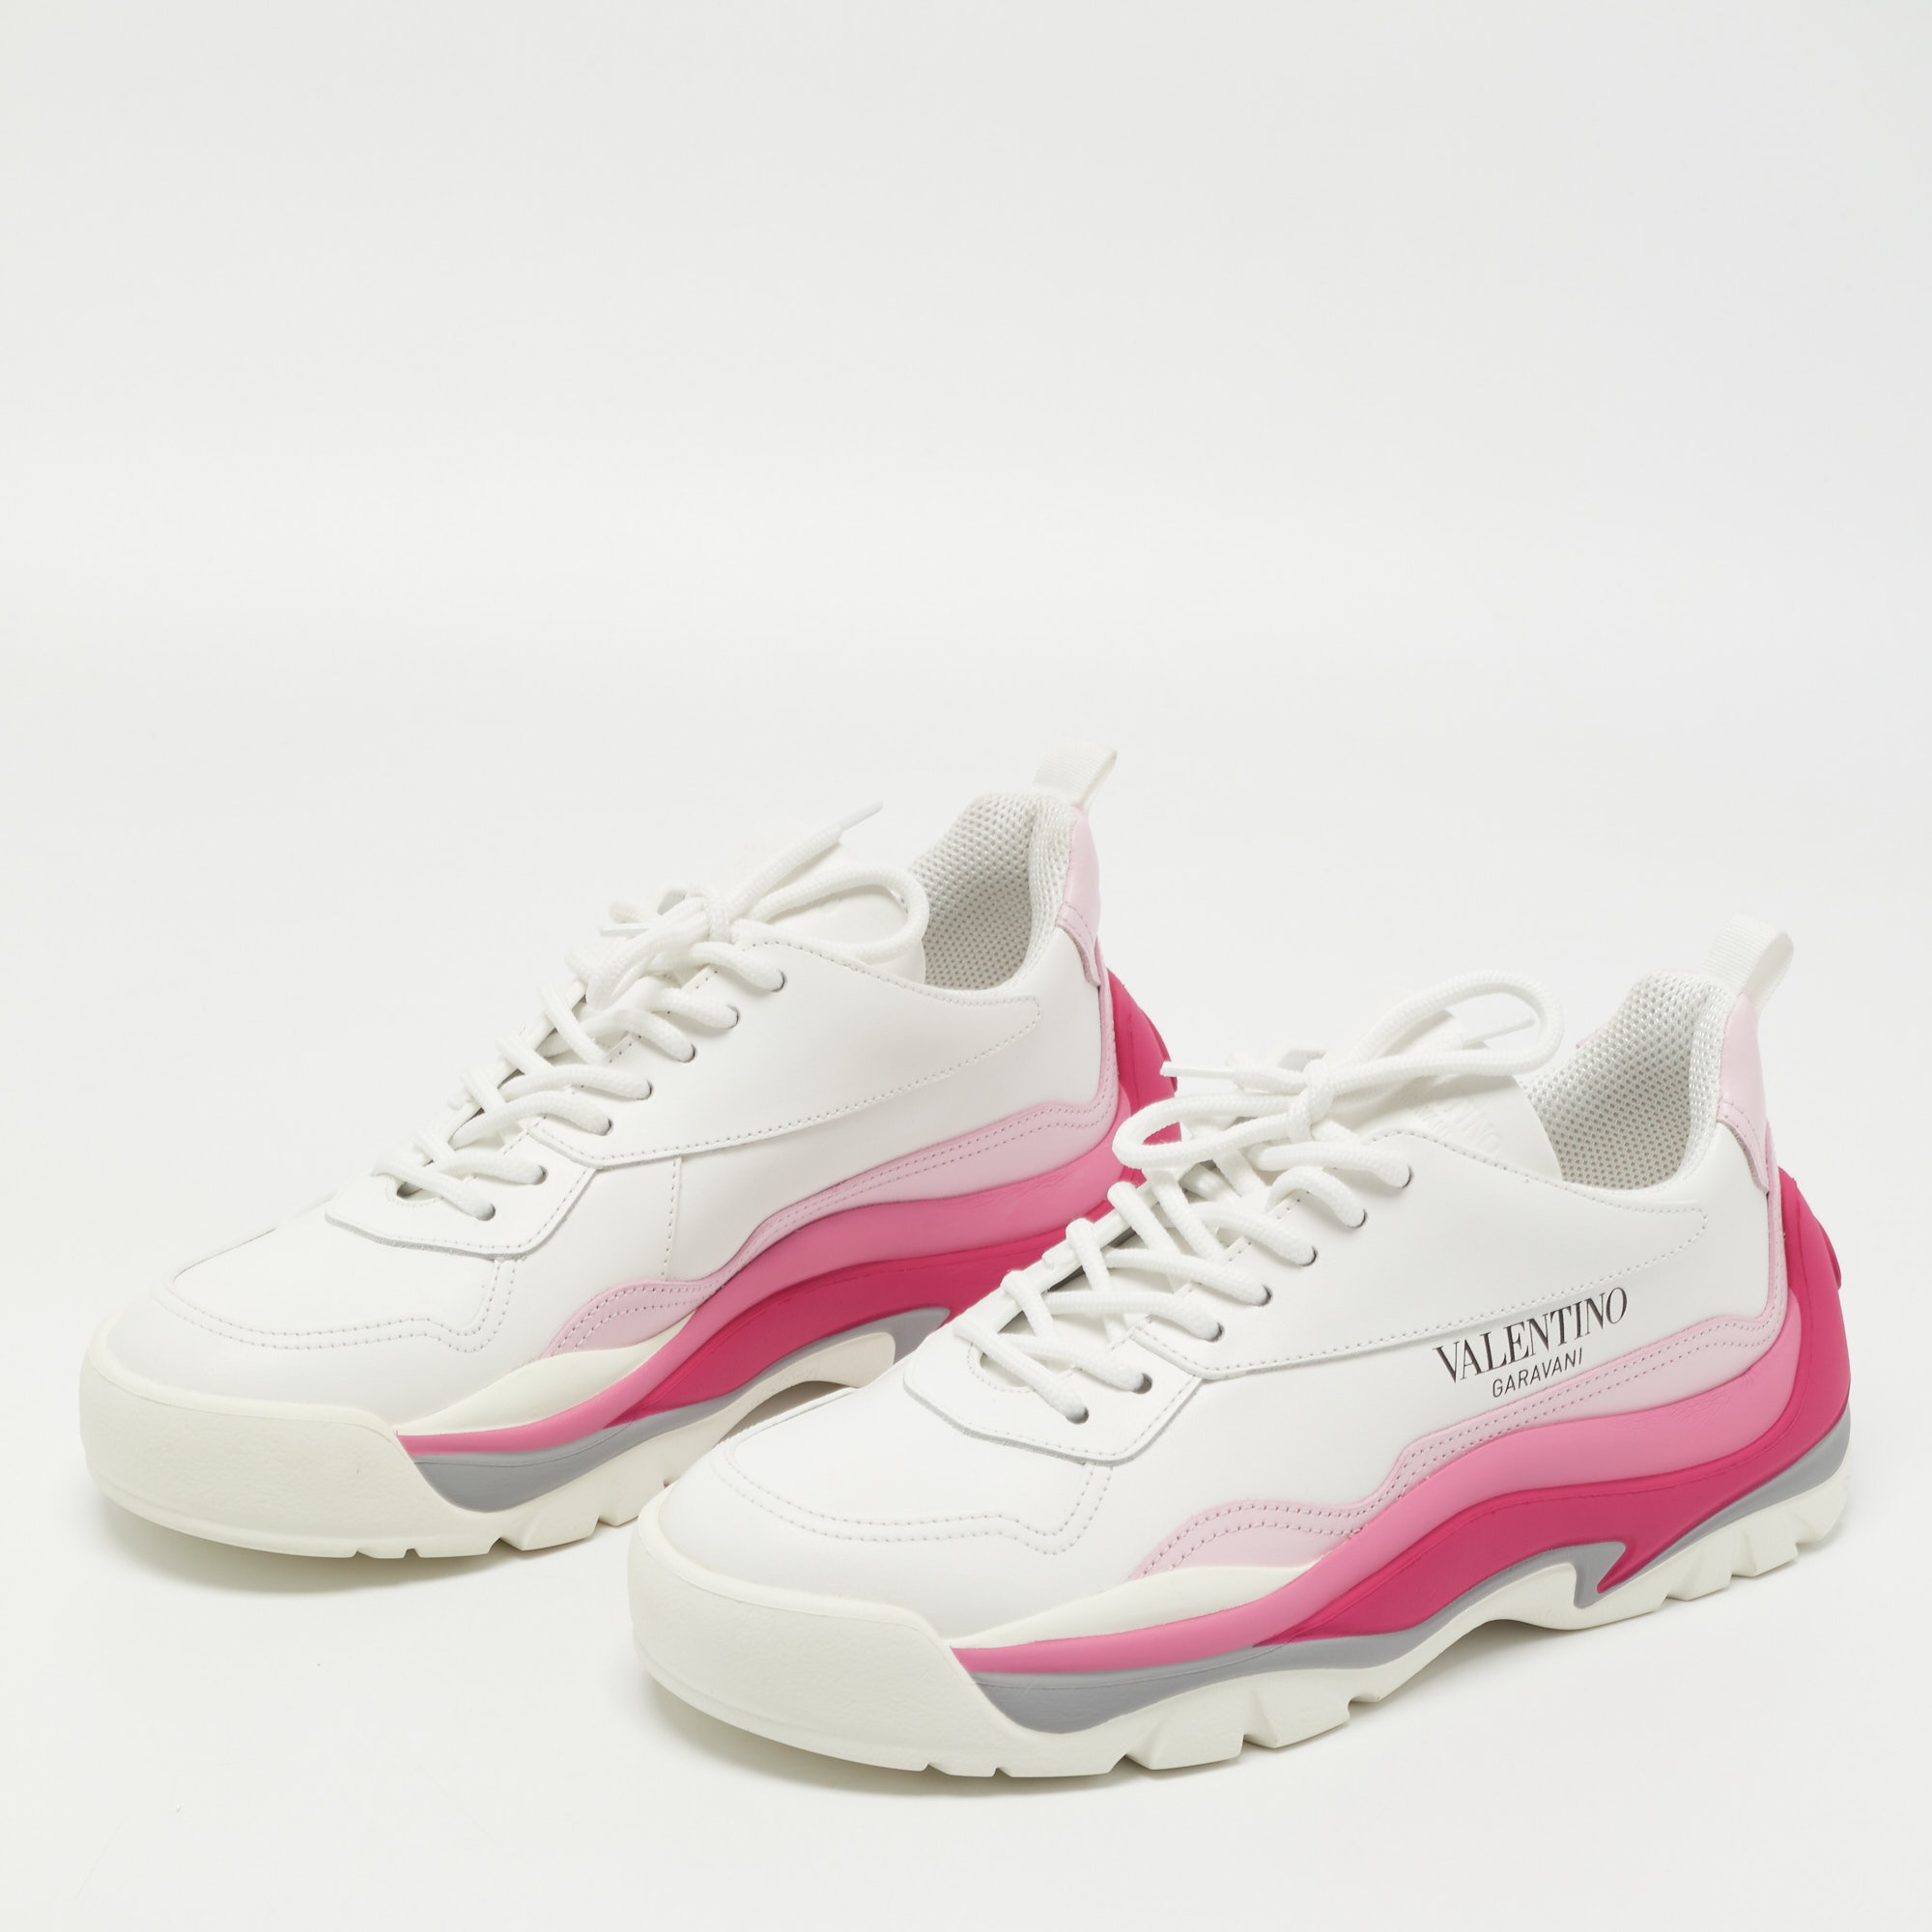 

Valentino White/Pink Leather Gumboy Sneakers Size